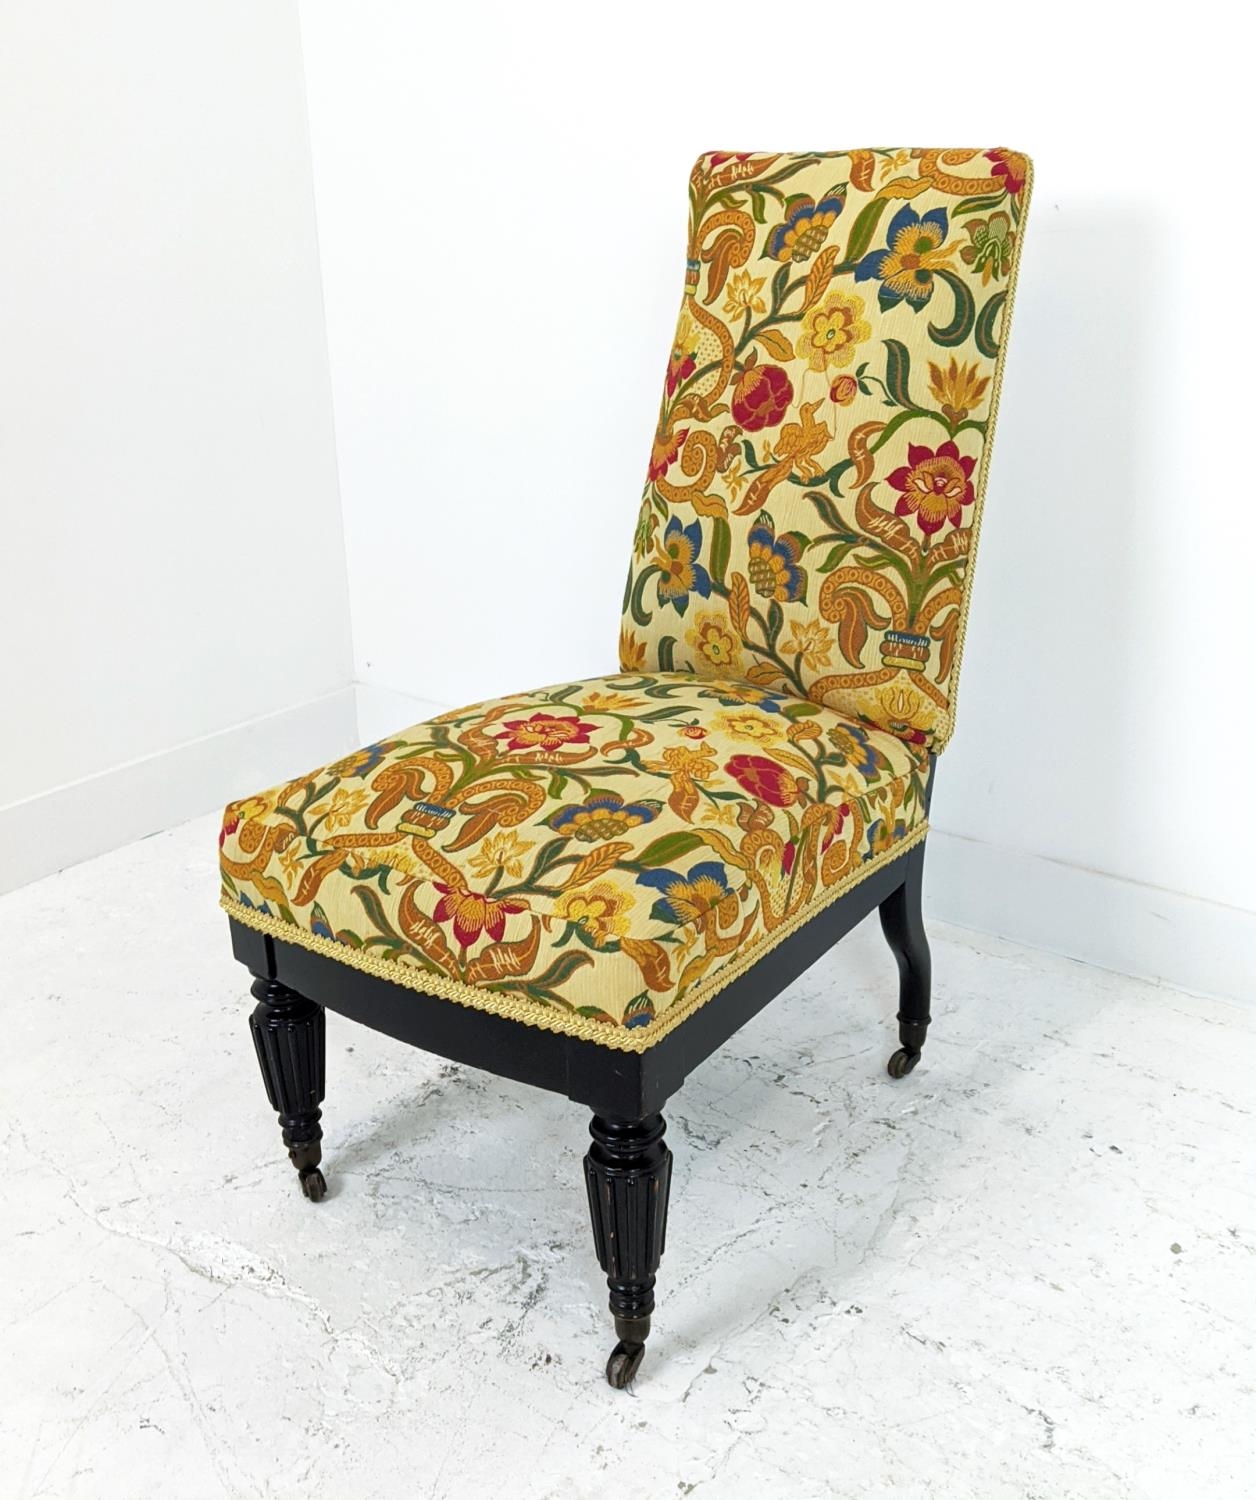 SLIPPER CHAIR, 19th century ebonised with William Morris patterned upholstery, 96cm H x 51cm W. - Image 5 of 18